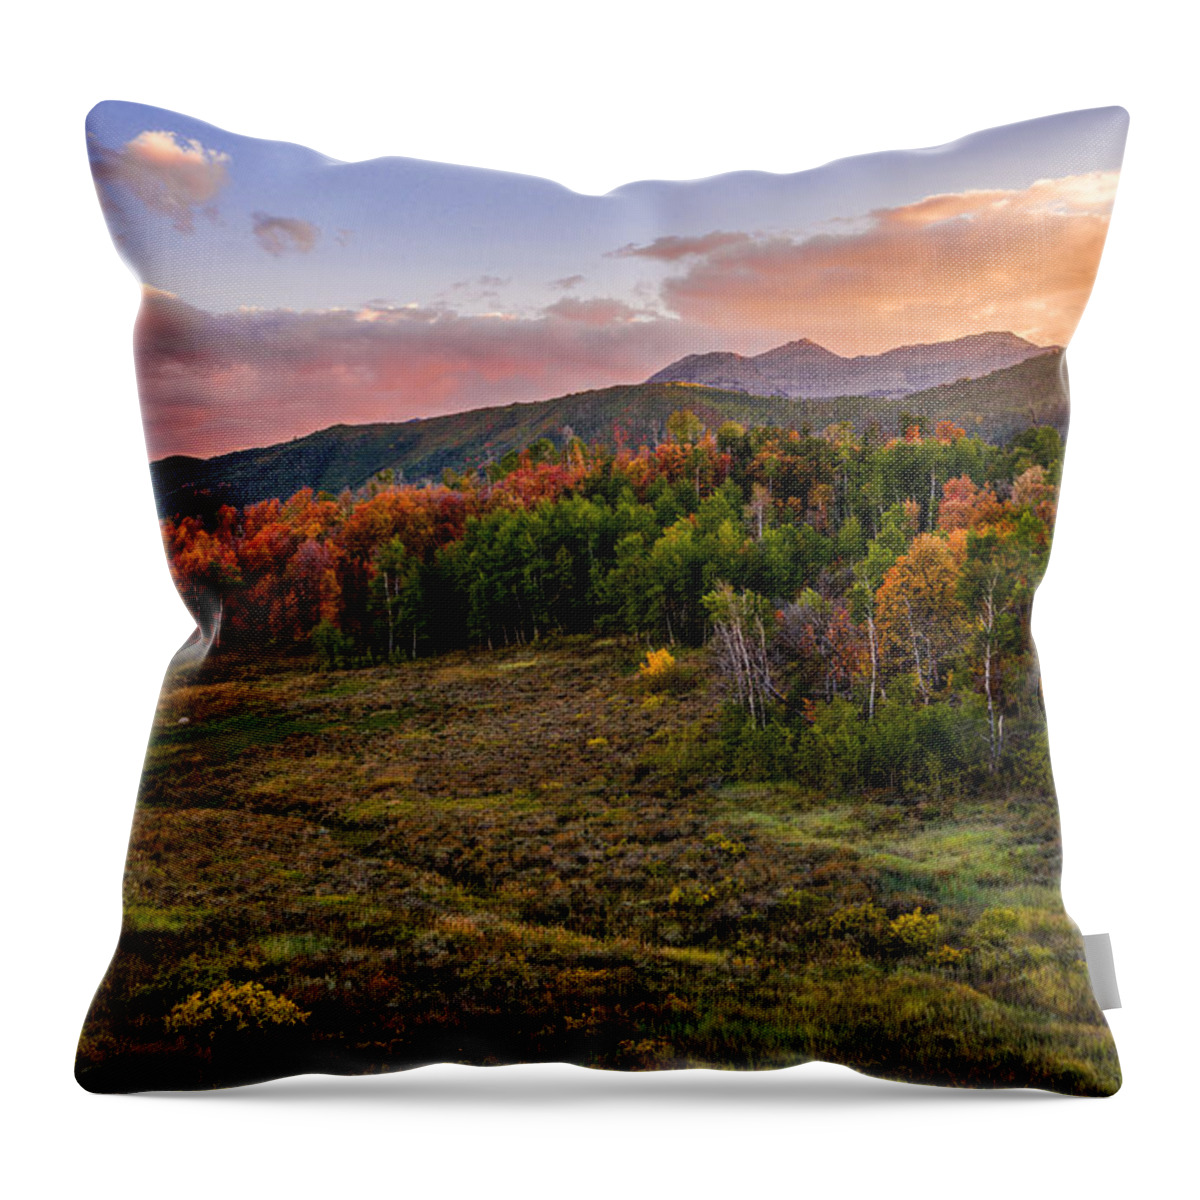 Timp Fall Glow Throw Pillow featuring the photograph Timp Fall Glow by Chad Dutson